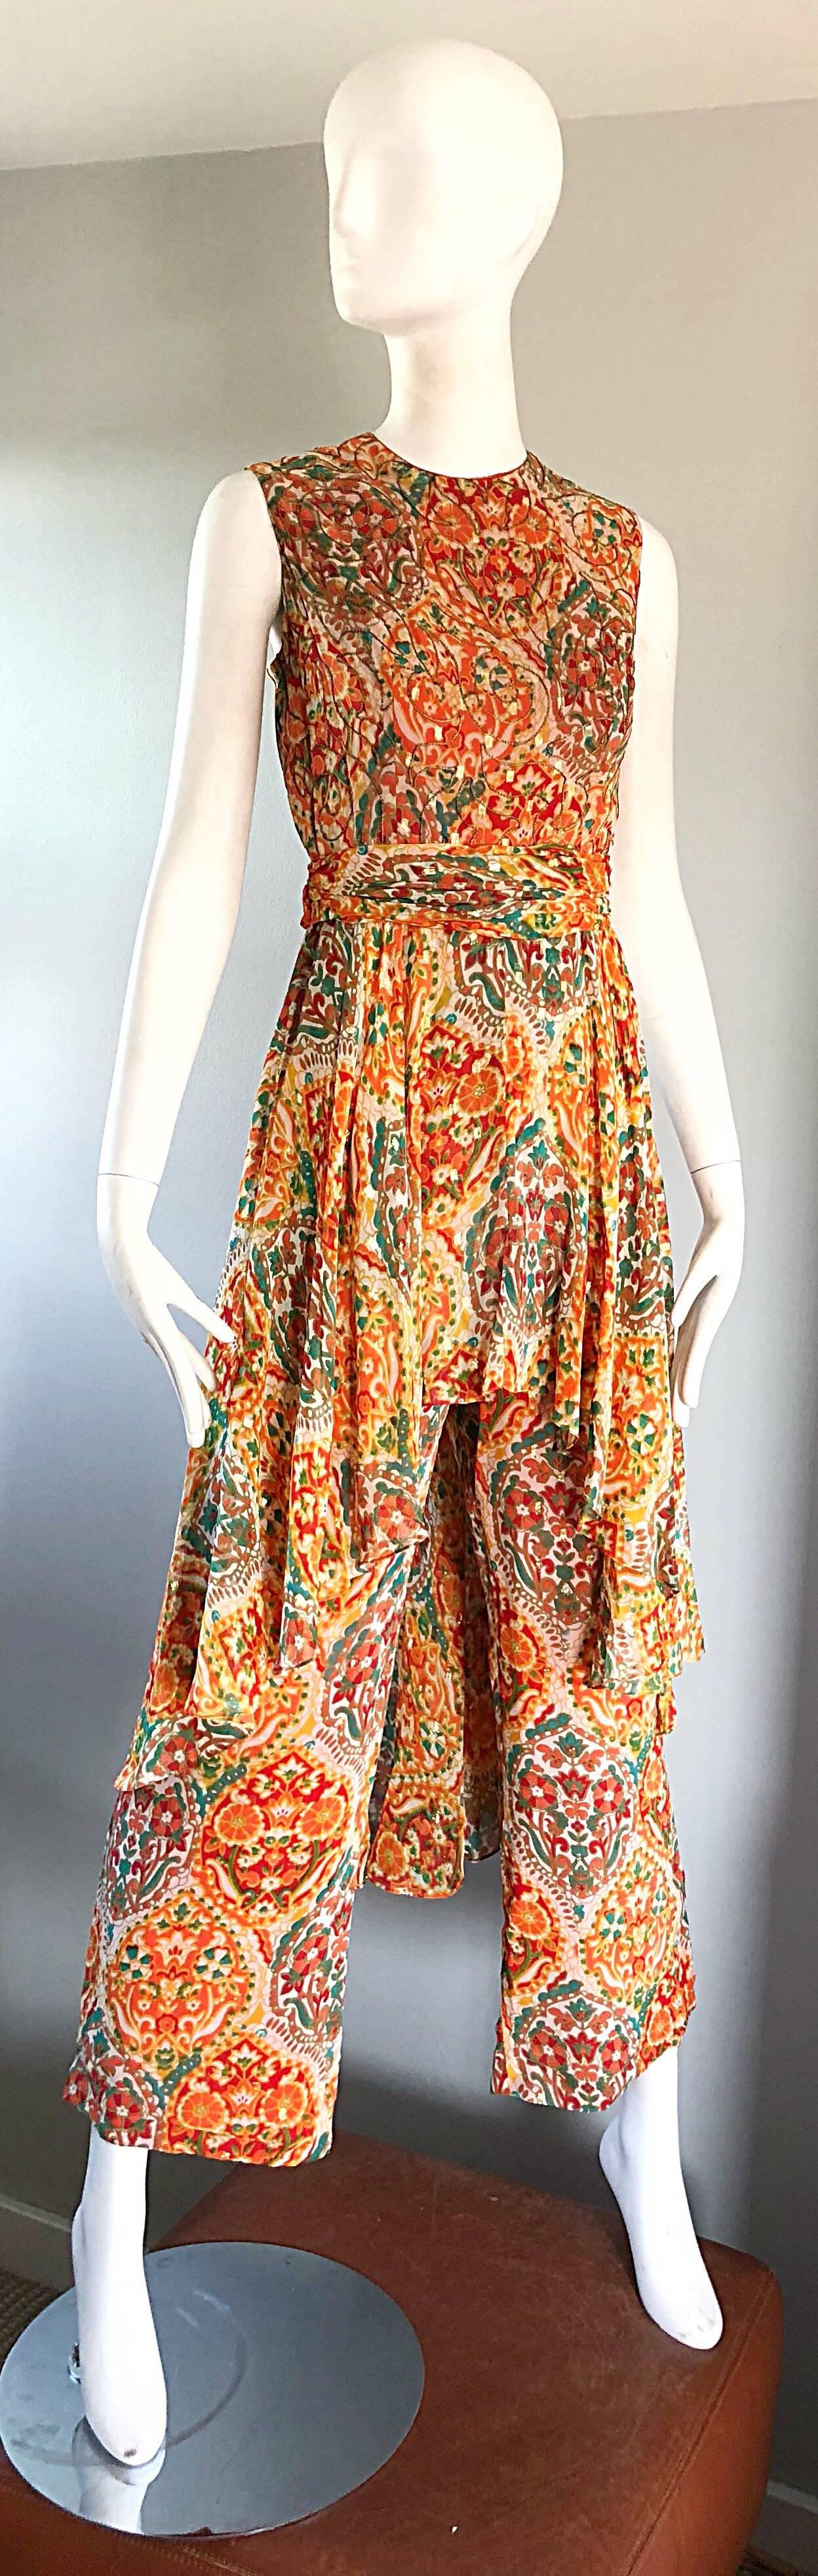 Amazing 70s OSCAR DE LA RENTA silk wide leg boho batik print jumpsuit, with attached skirt! Features vibrant colors of orange, green, brown, burgundy, yellow throughout. Fitted bodice features gold silk threading throughout. Wide palazzo legs. Full